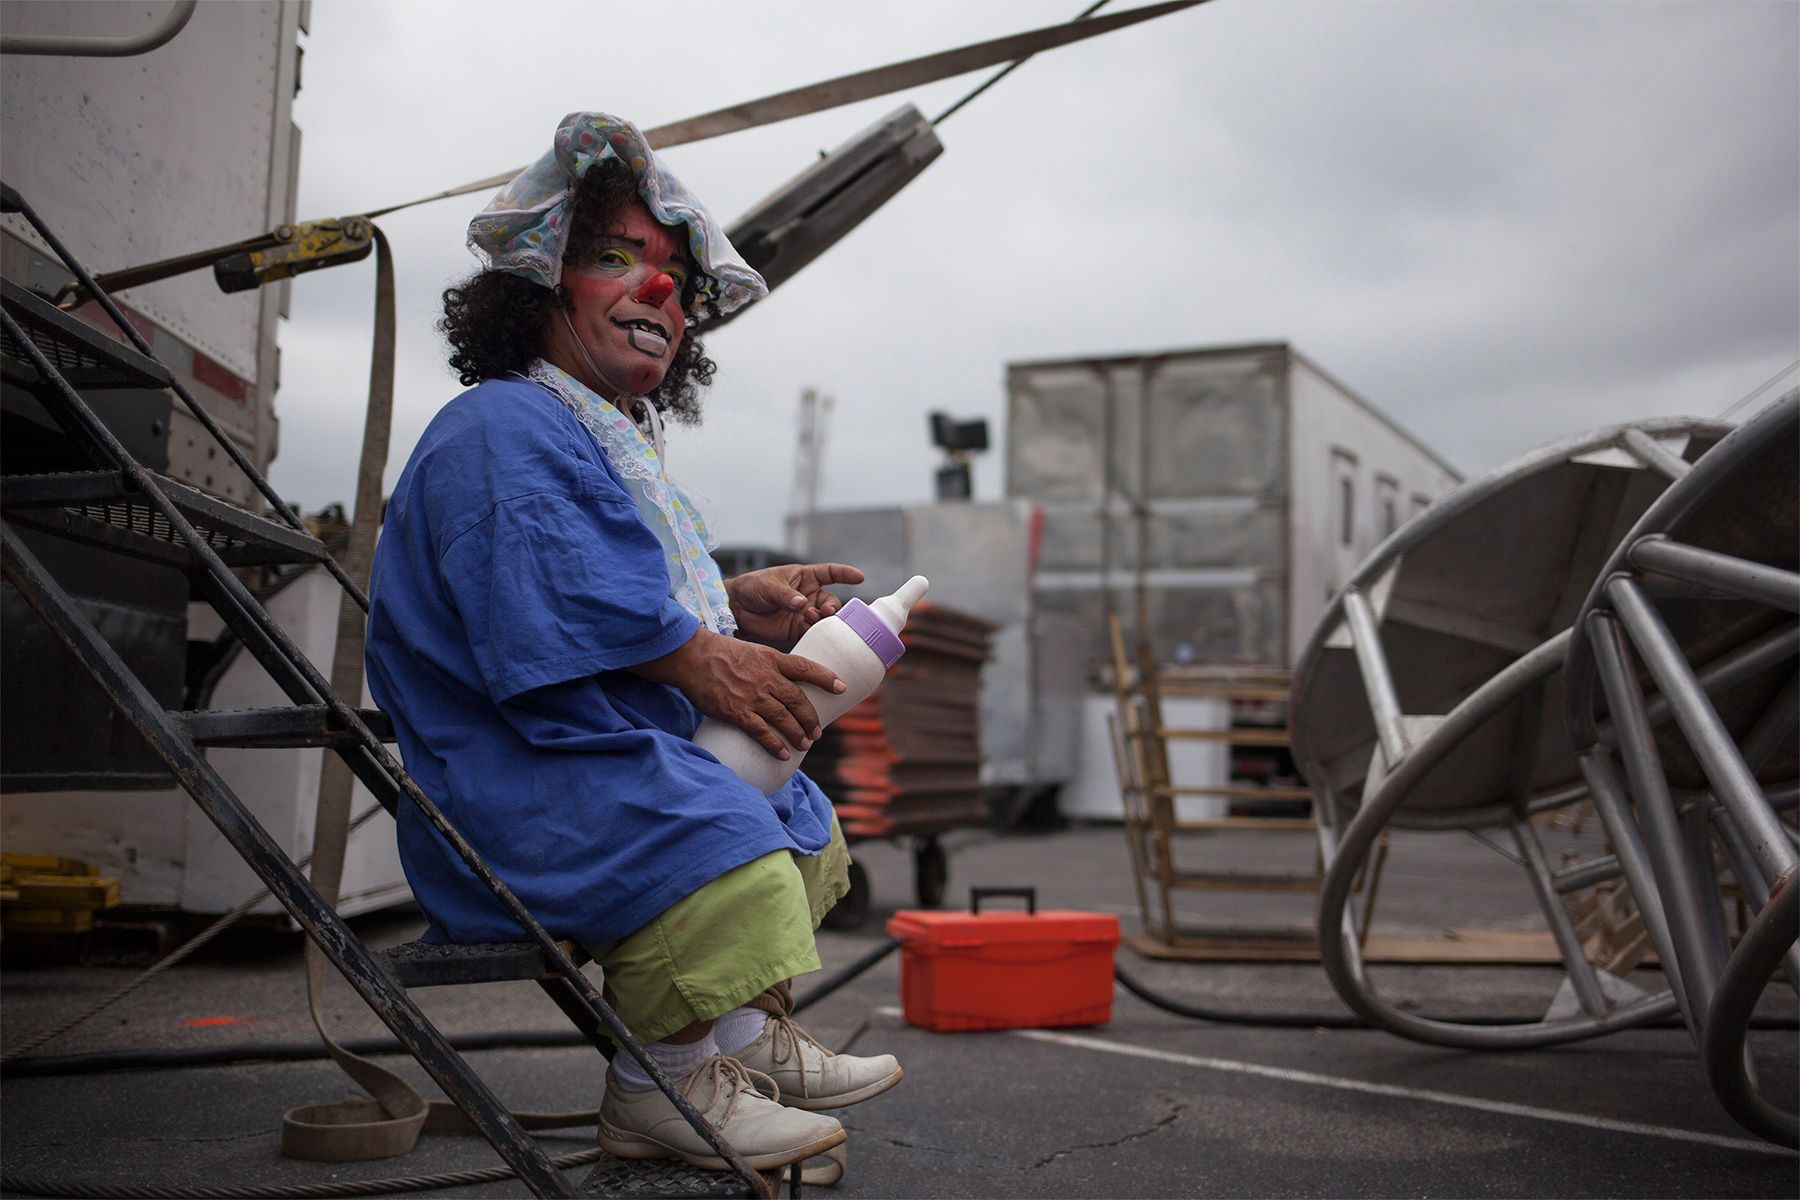 Lolito Castillo, a clown with The Cole Brothers Circus of the Stars, rests between acts backstage on Tuesday afternoon during the early show on September 9, 2014 in Myrtle Beach. The Cole Brothers Circus of the Stars tent city is in town  through Thursday on the site of the old Myrtle Square Mall in Myrtle Beach, South Carolina. Traveling circuses such as Cole Brothers, complete with it's traveling big top tent, set up shows all along the East Coast of the United States. Now in its 130th year, the big top travels to100 cities in 20-25 states and they stage 250 shows a year.